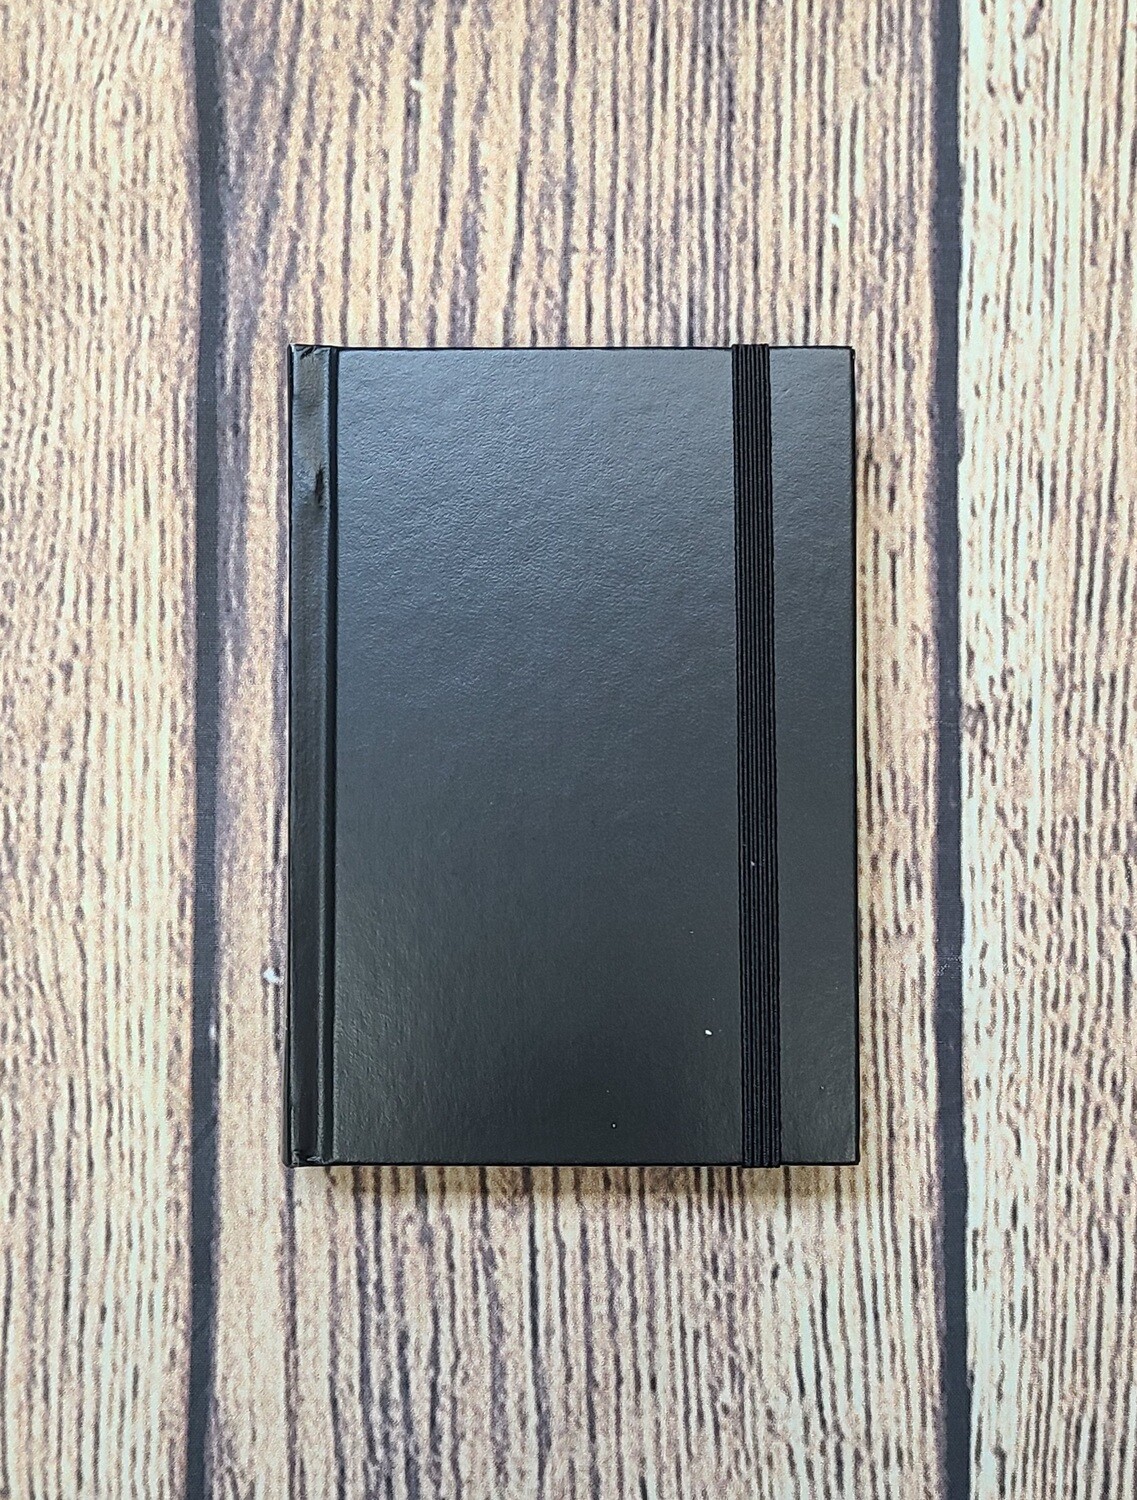 ESV Large Print Compact Bible - Black Leather with Strap